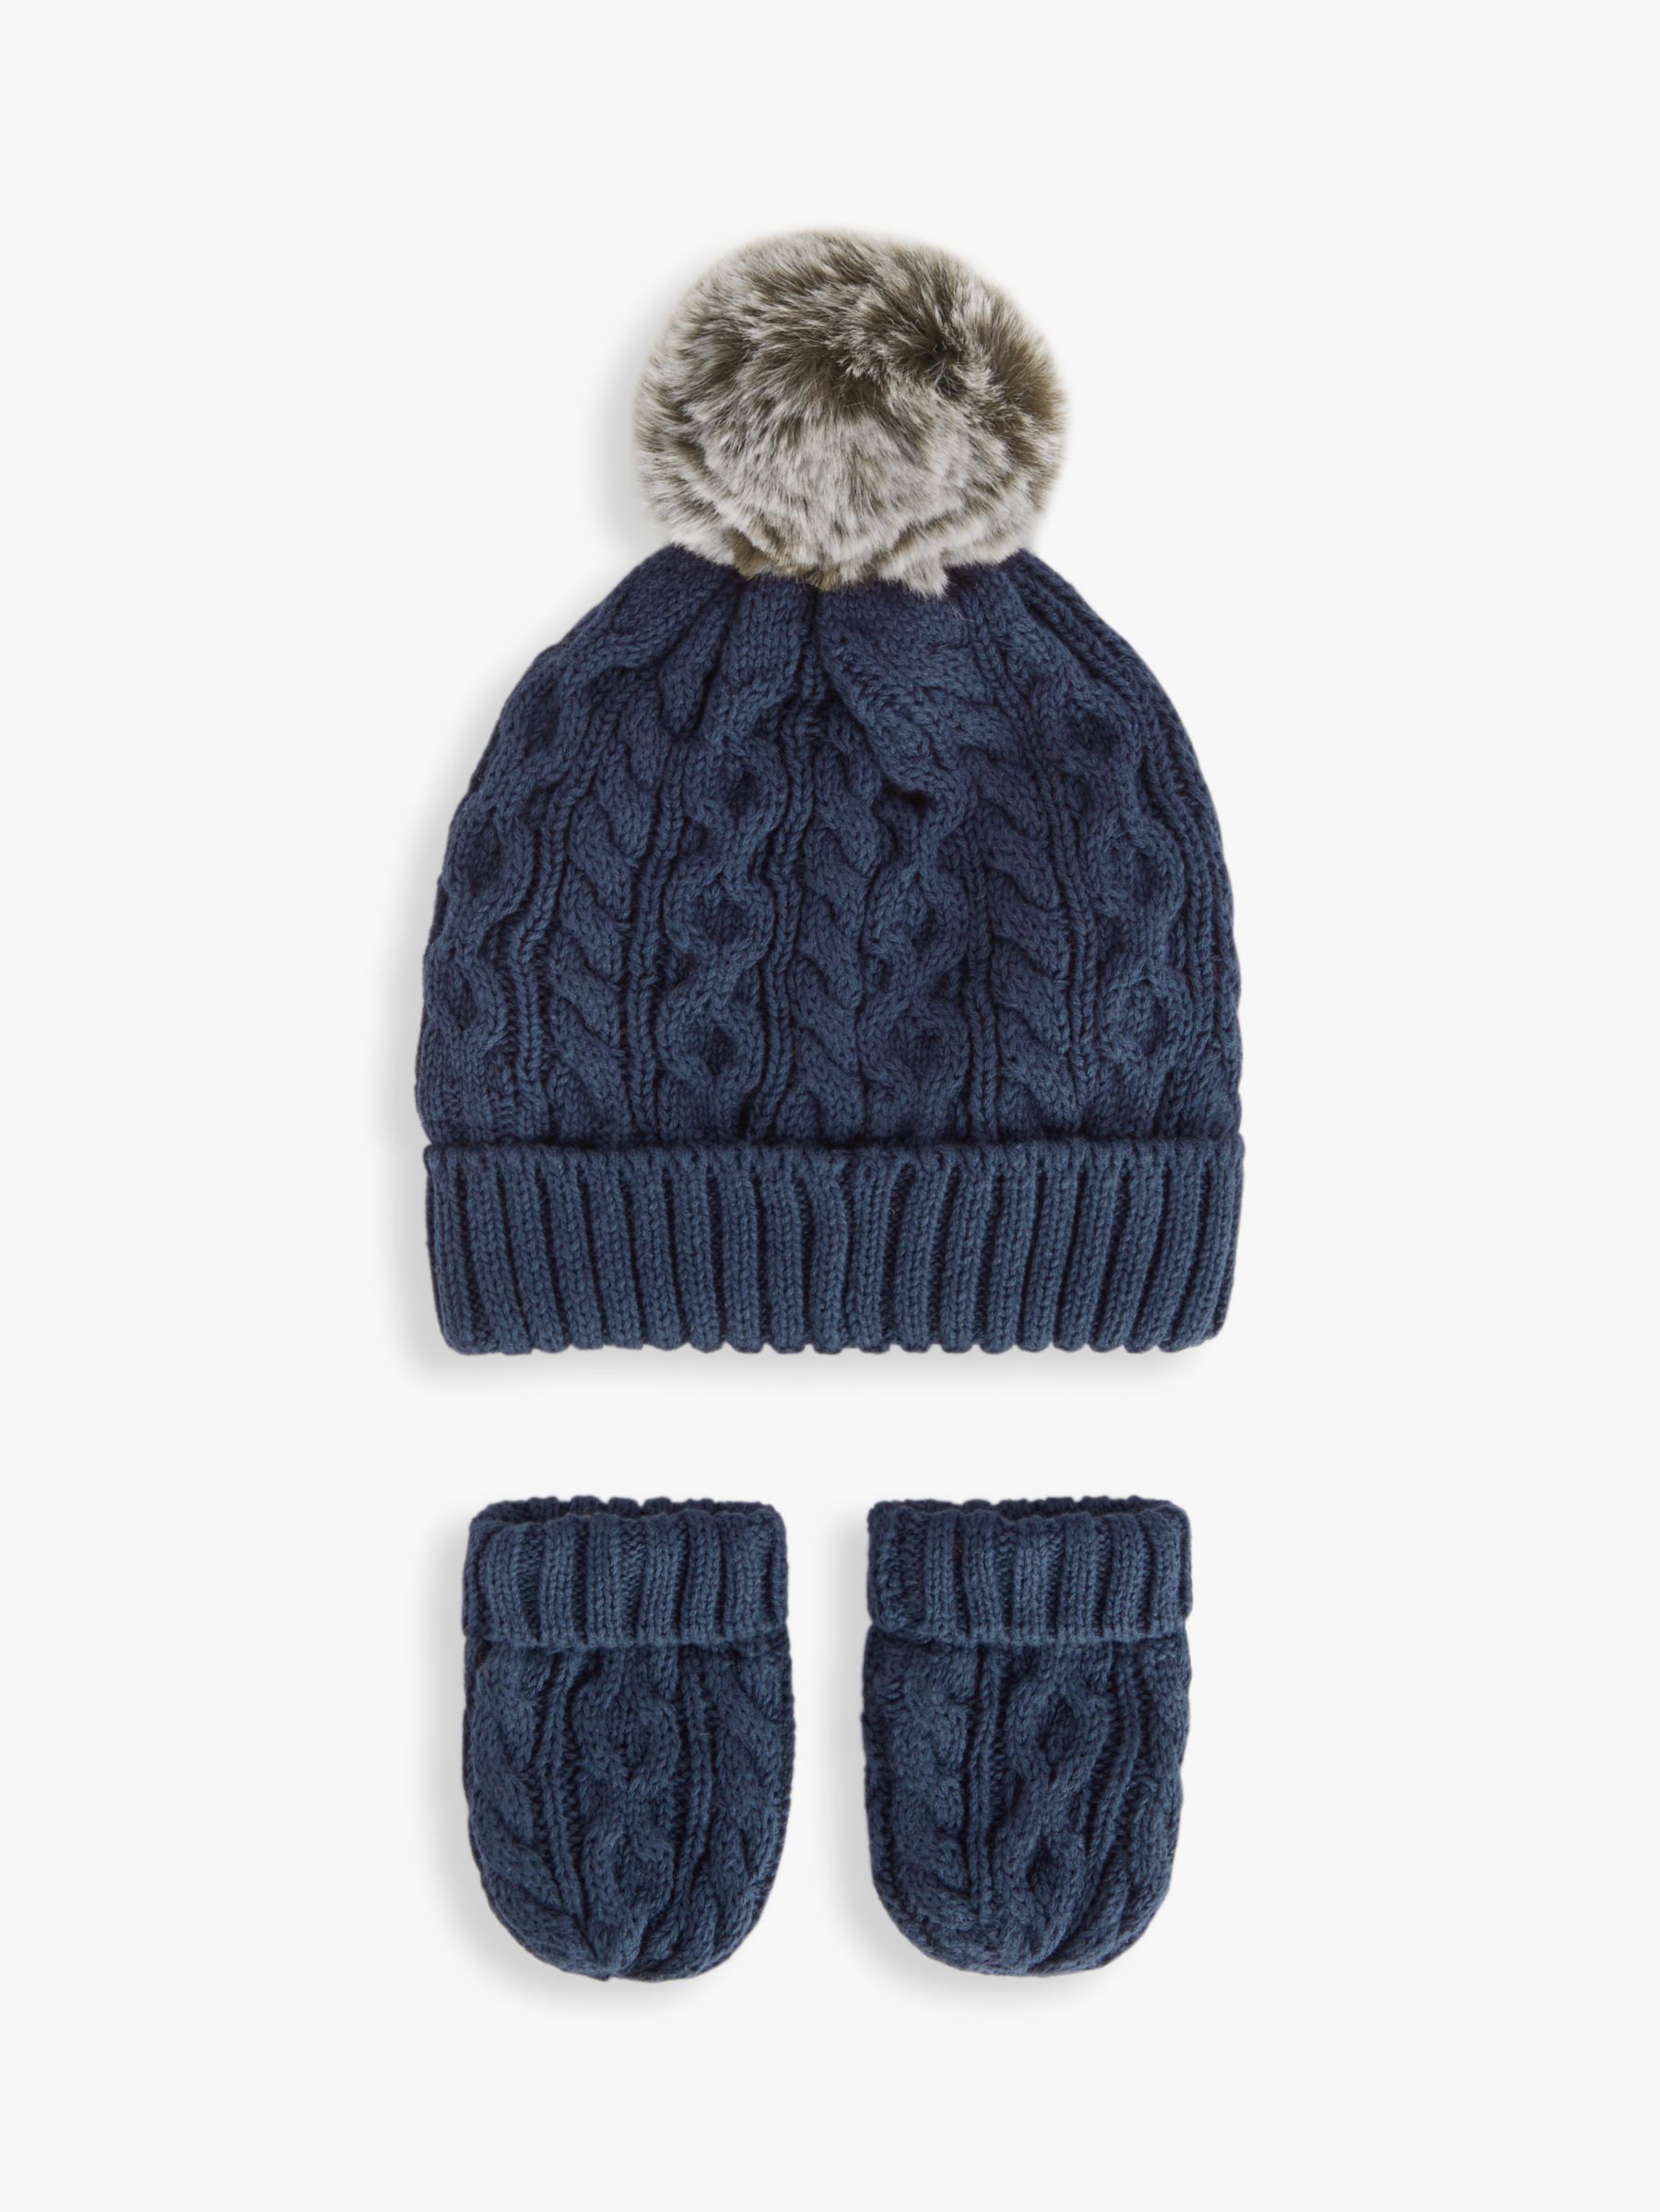 Buy John Lewis Baby Cable Knit Bobble Hat & Mittens Set Online at johnlewis.com